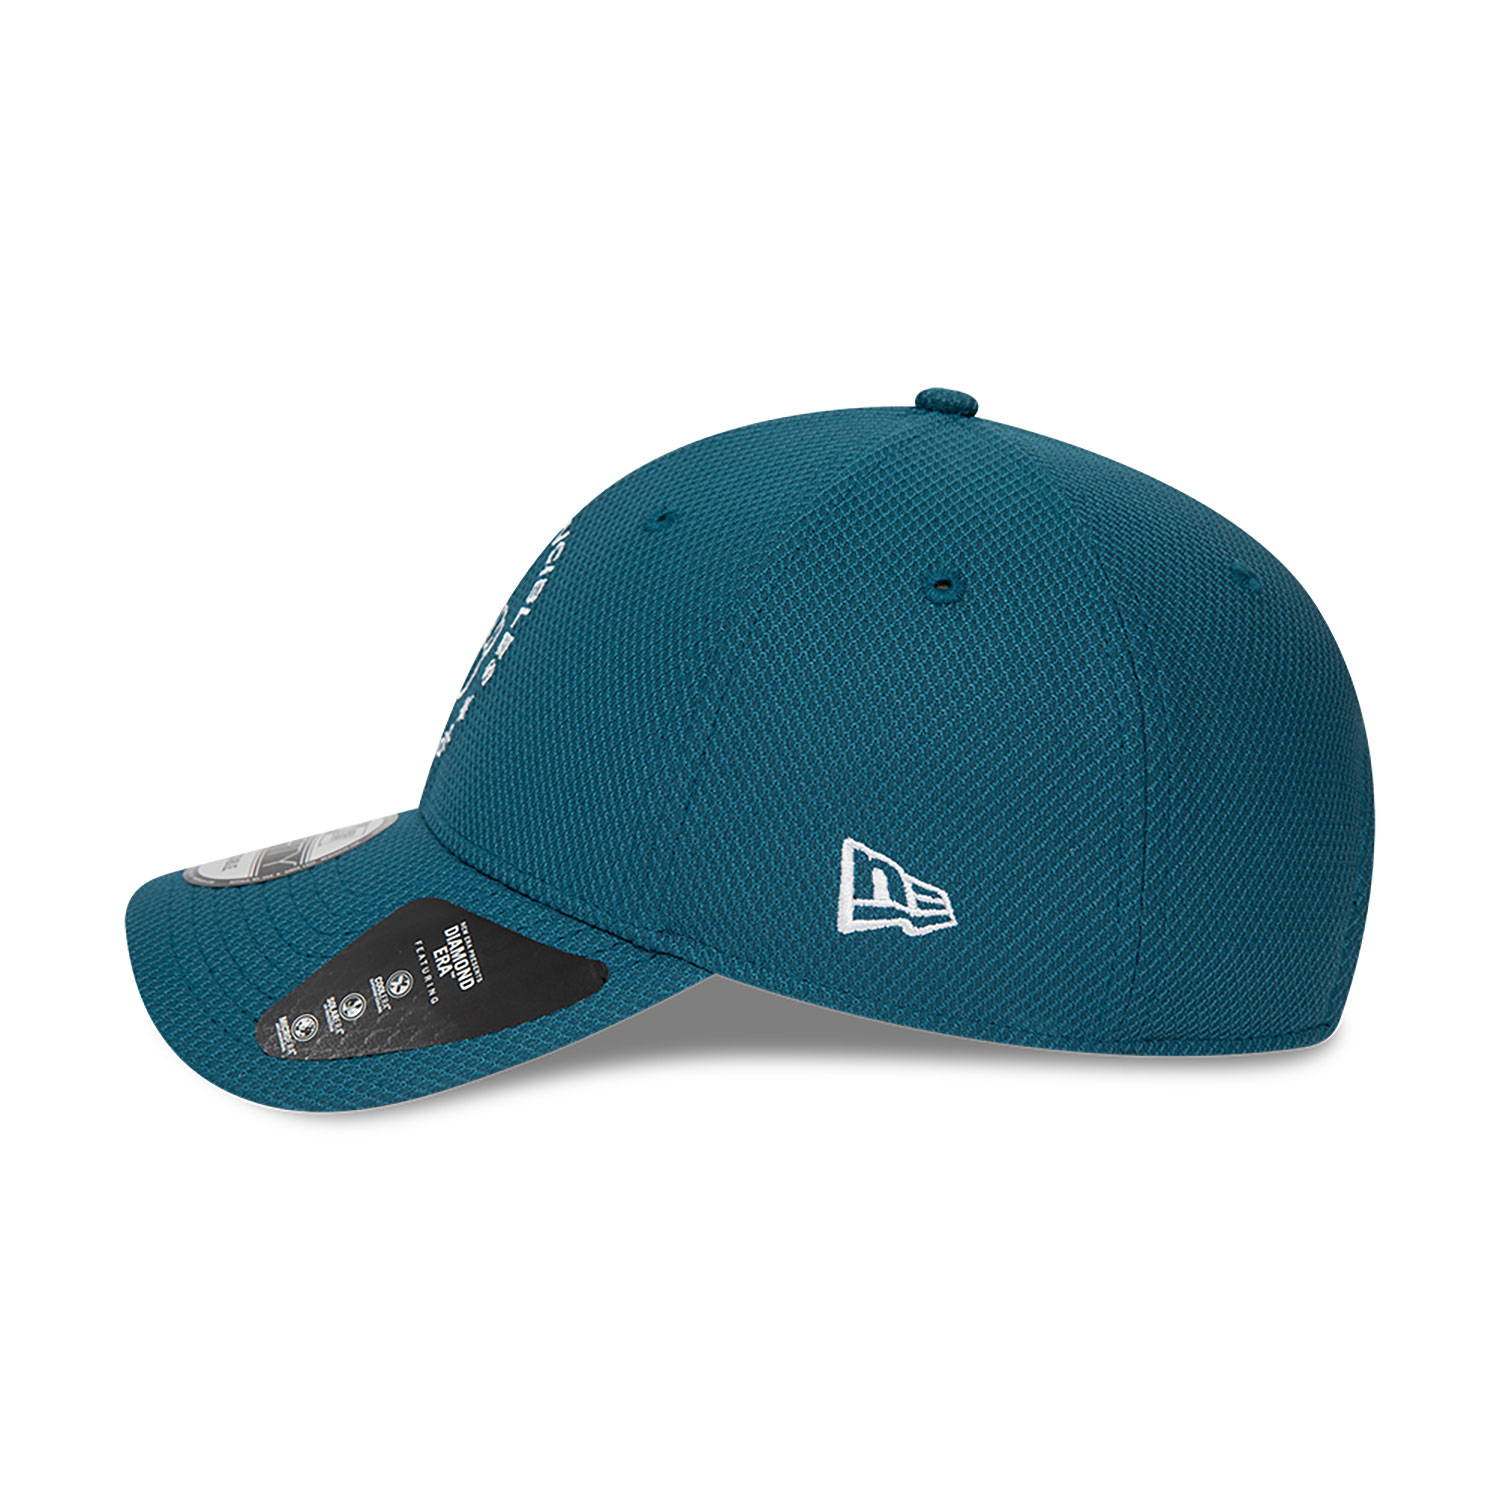 Gorra New Era Oval Invincibles The Hundred 39THIRTY Stretch Fit